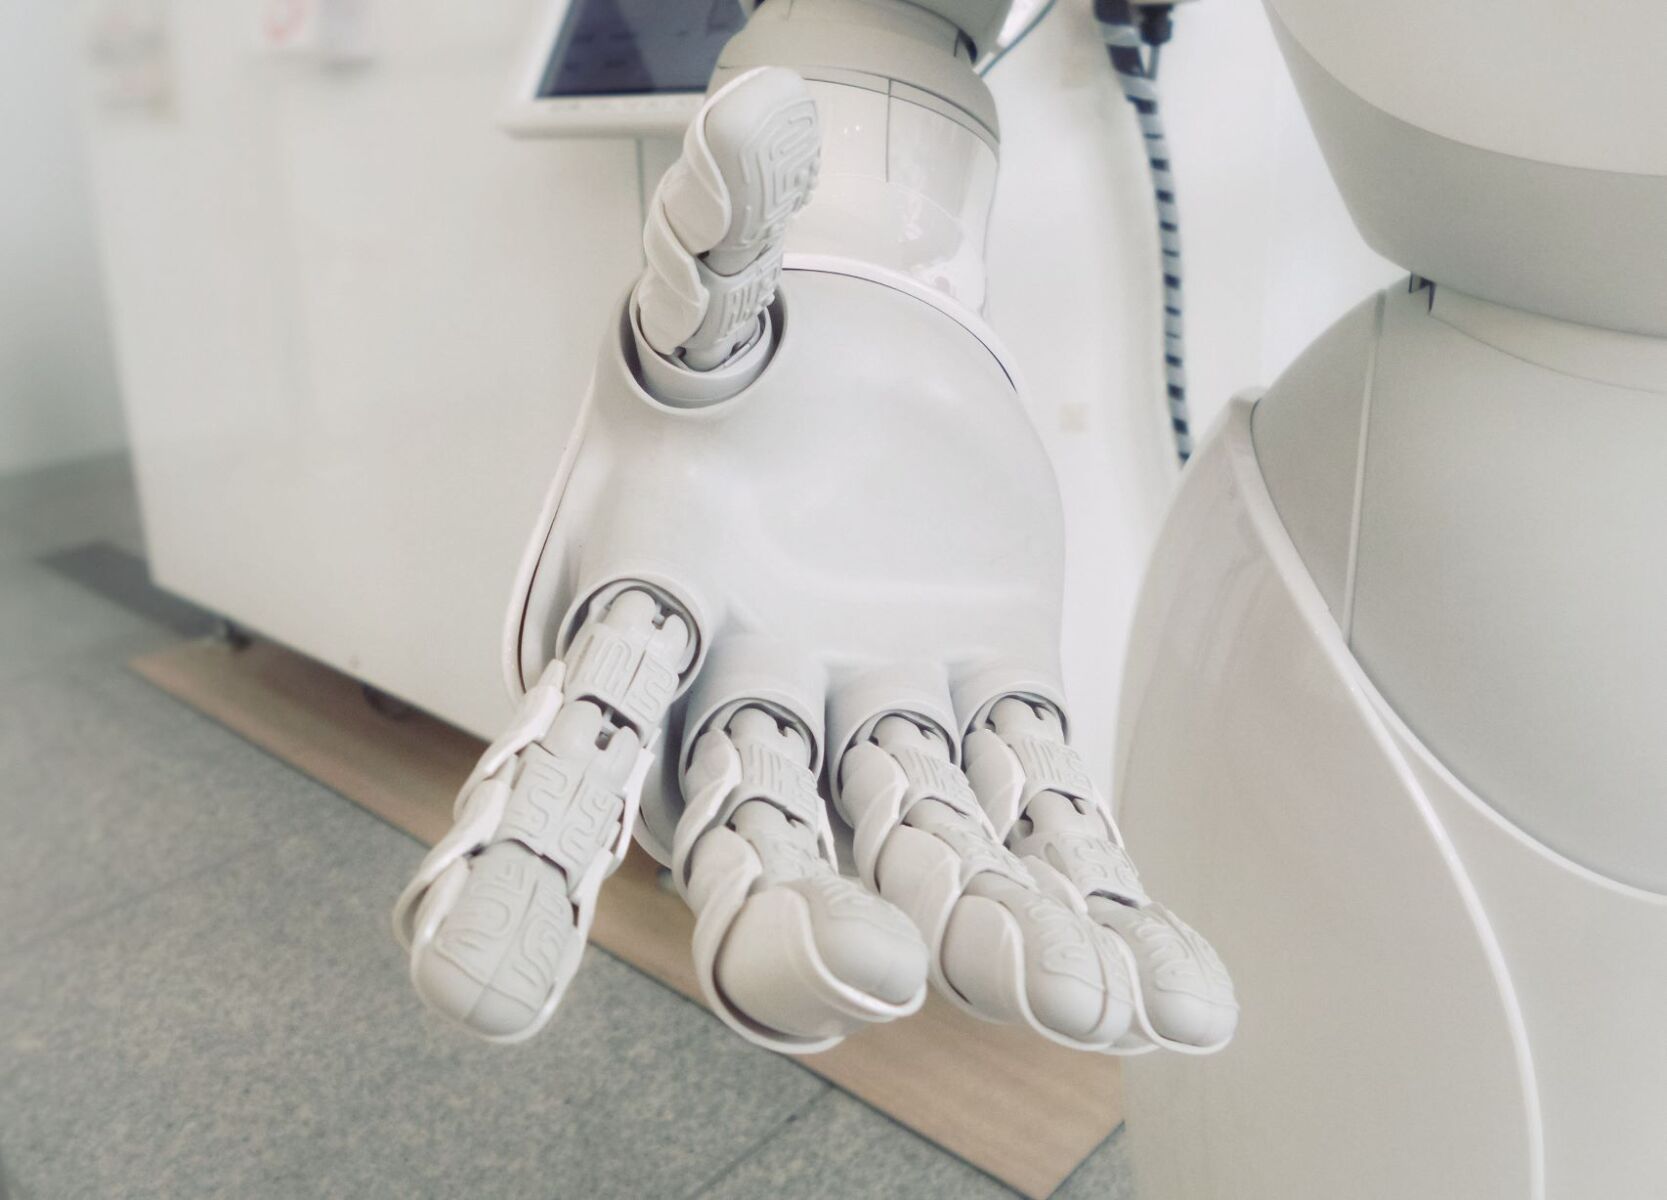 Automation is great – but do SMEs still need that human touch?